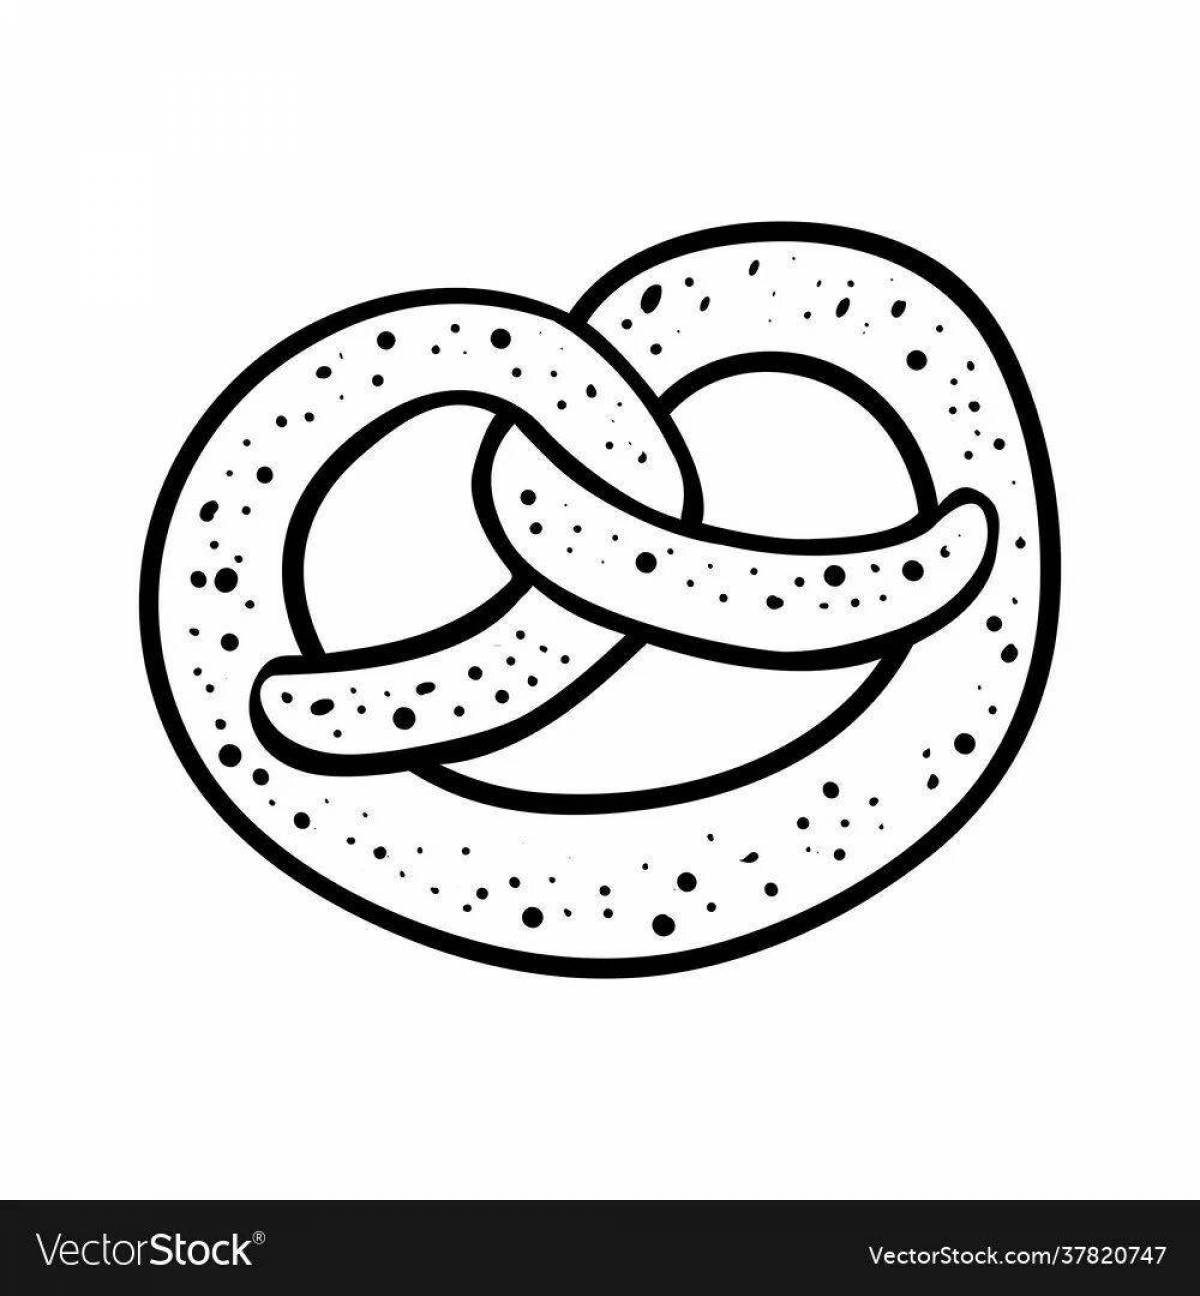 Coloring page of an irresistible bagel with donuts